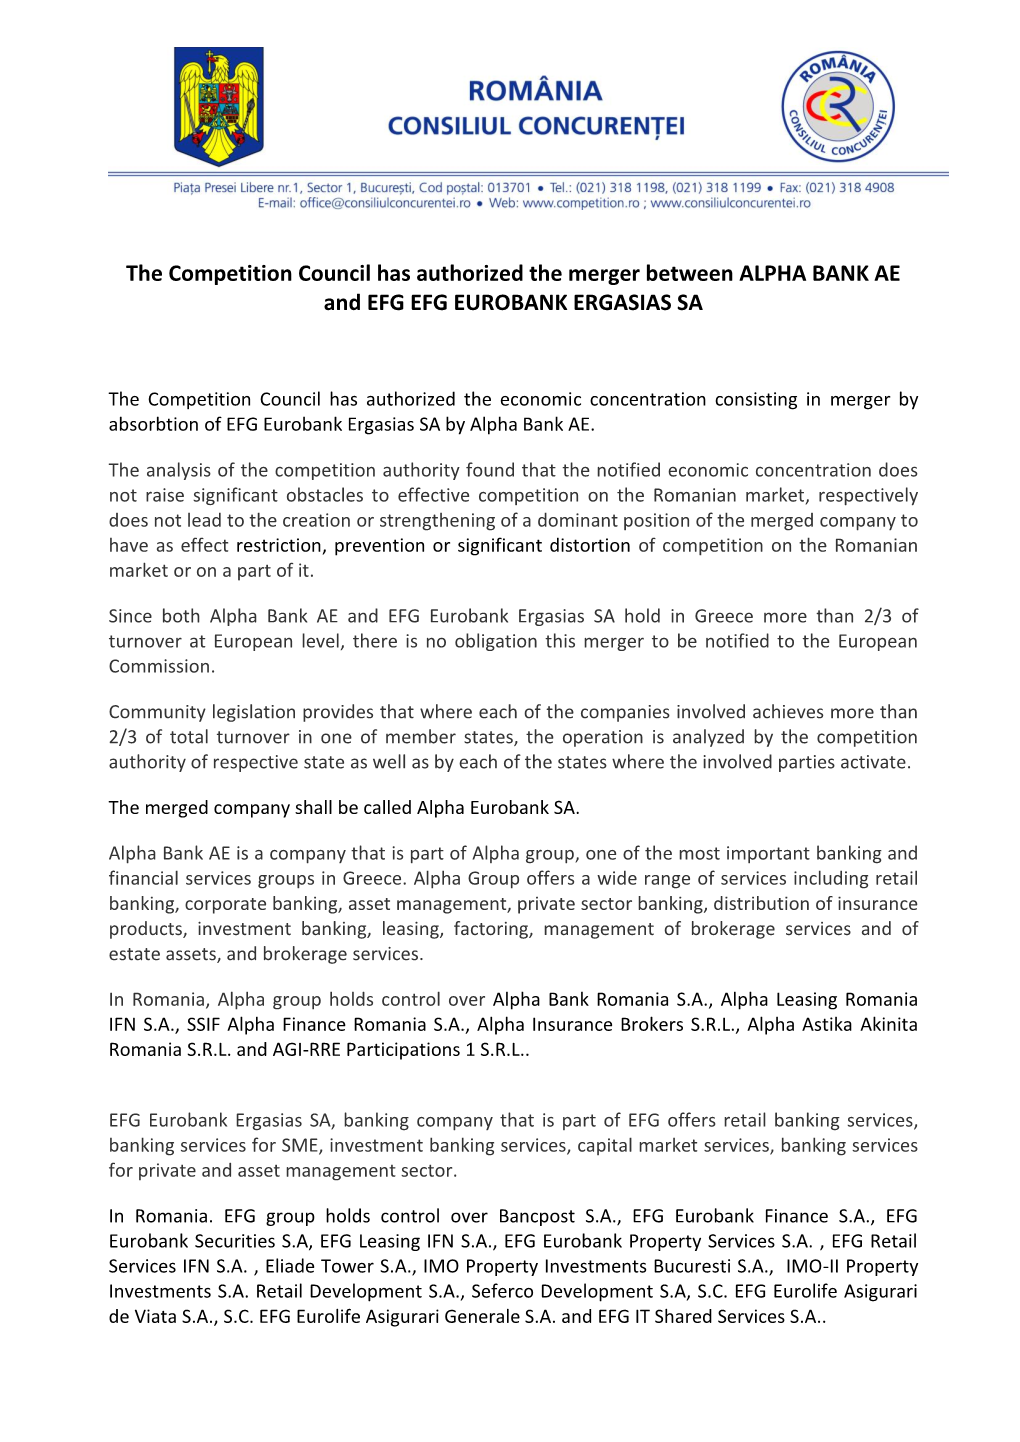 The Competition Council Has Authorized the Merger Between ALPHA BANK AE and EFG EFG EUROBANK ERGASIAS SA